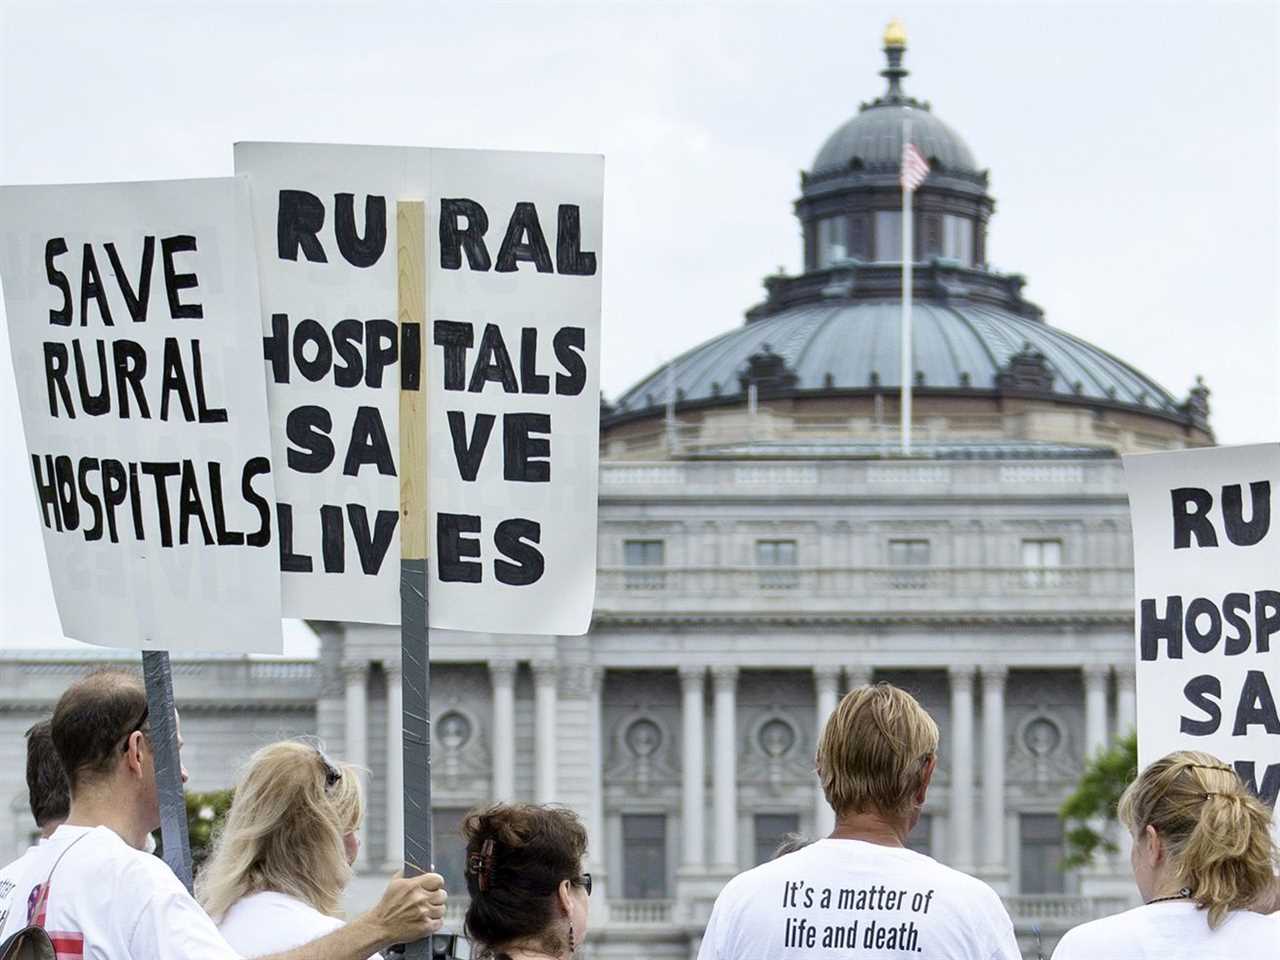 Protesters carry signs that read “Save rural hospitals” and “Rural hospitals save lives.”